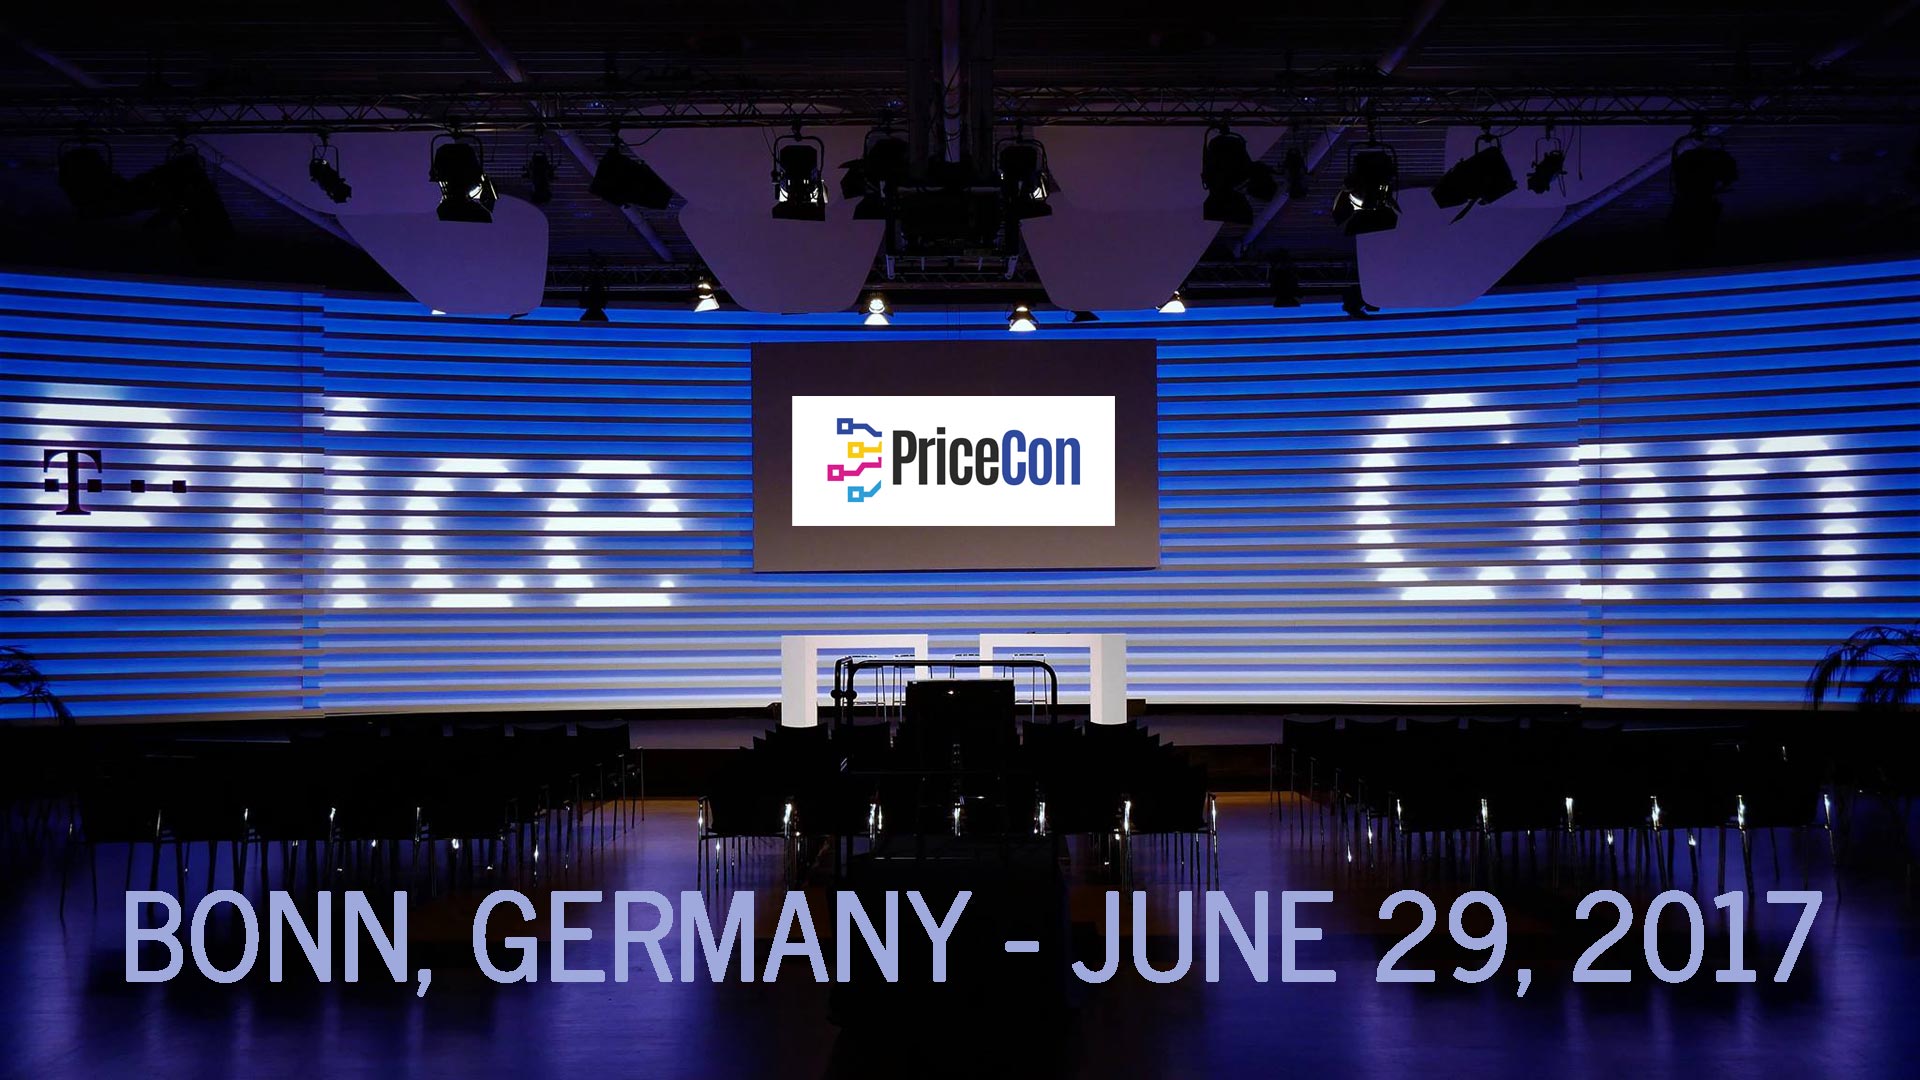 Startup Conference PriceCon Bonn Germany June 29